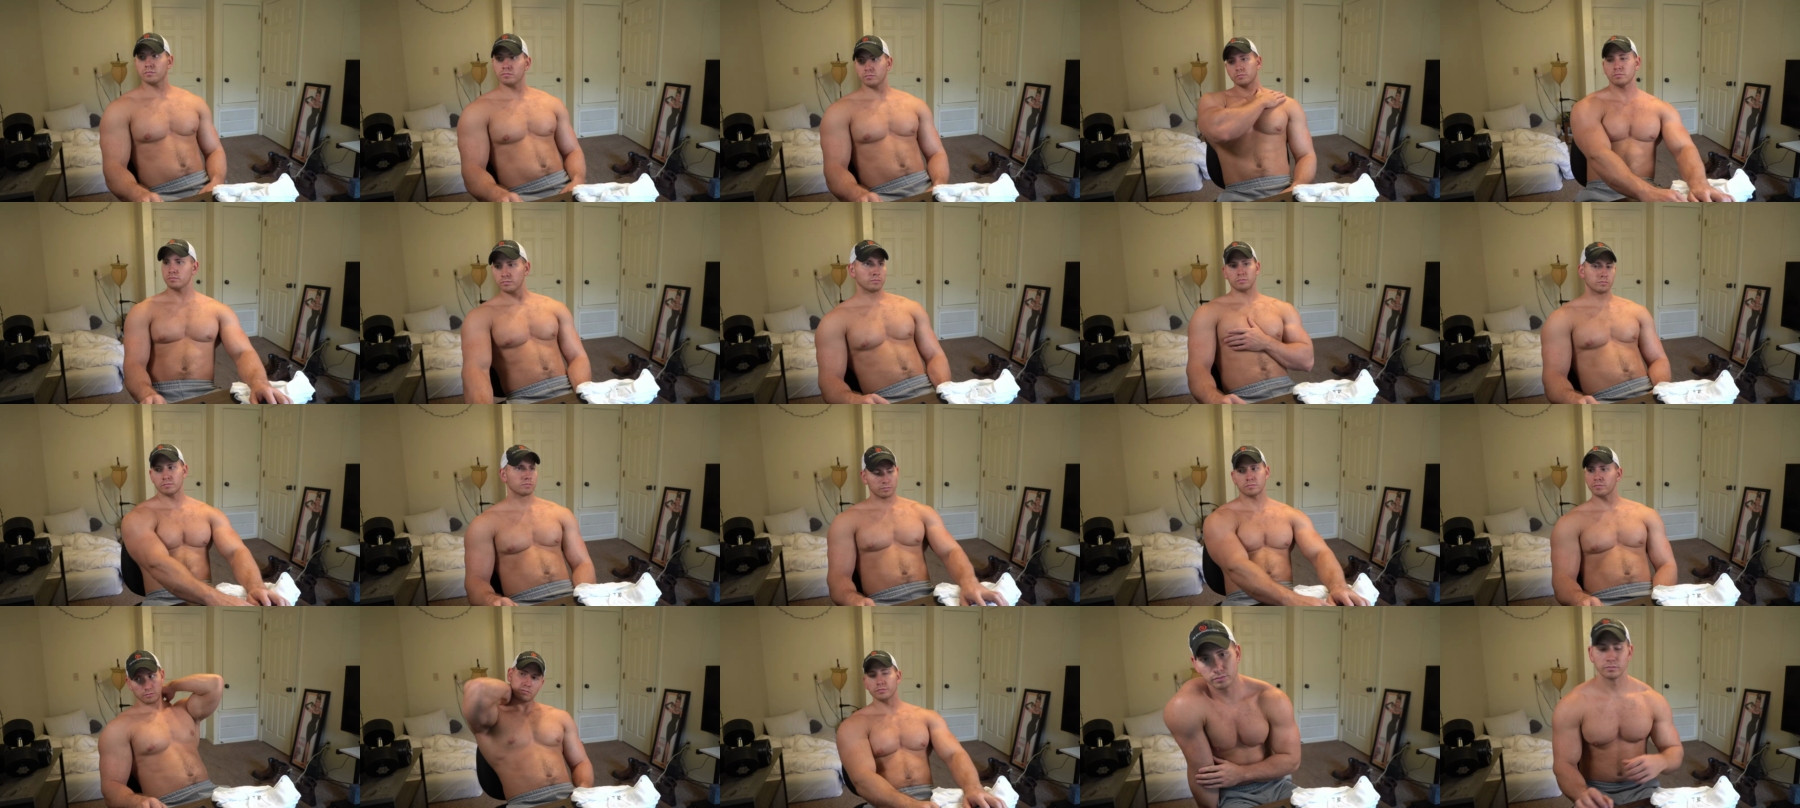 Hotmuscles6t9 Wet CAM SHOW @ Chaturbate 20-04-2021